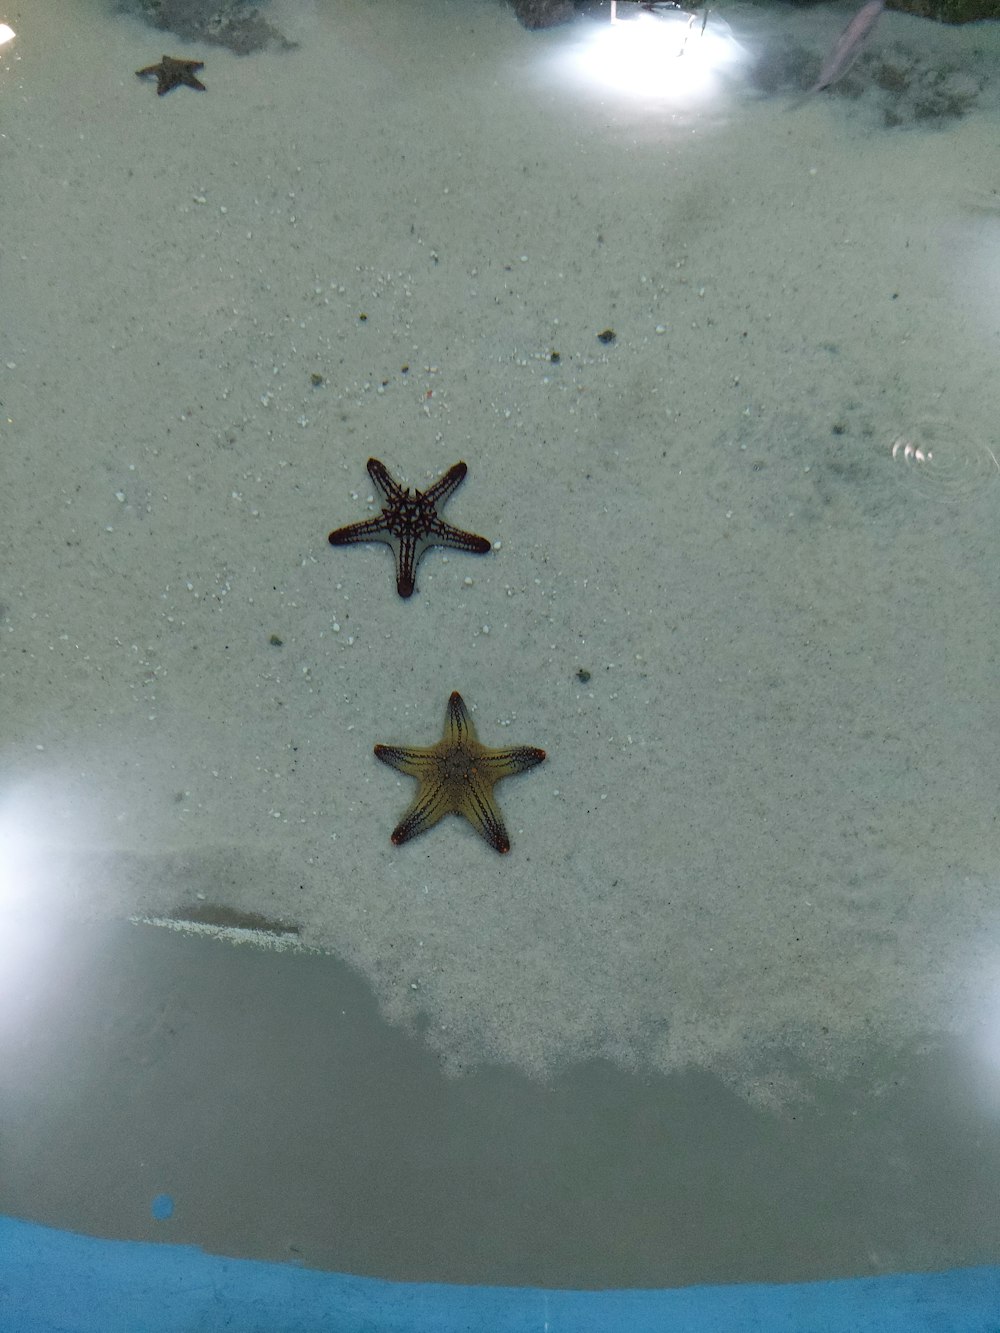 two starfishs swimming in a pool of water